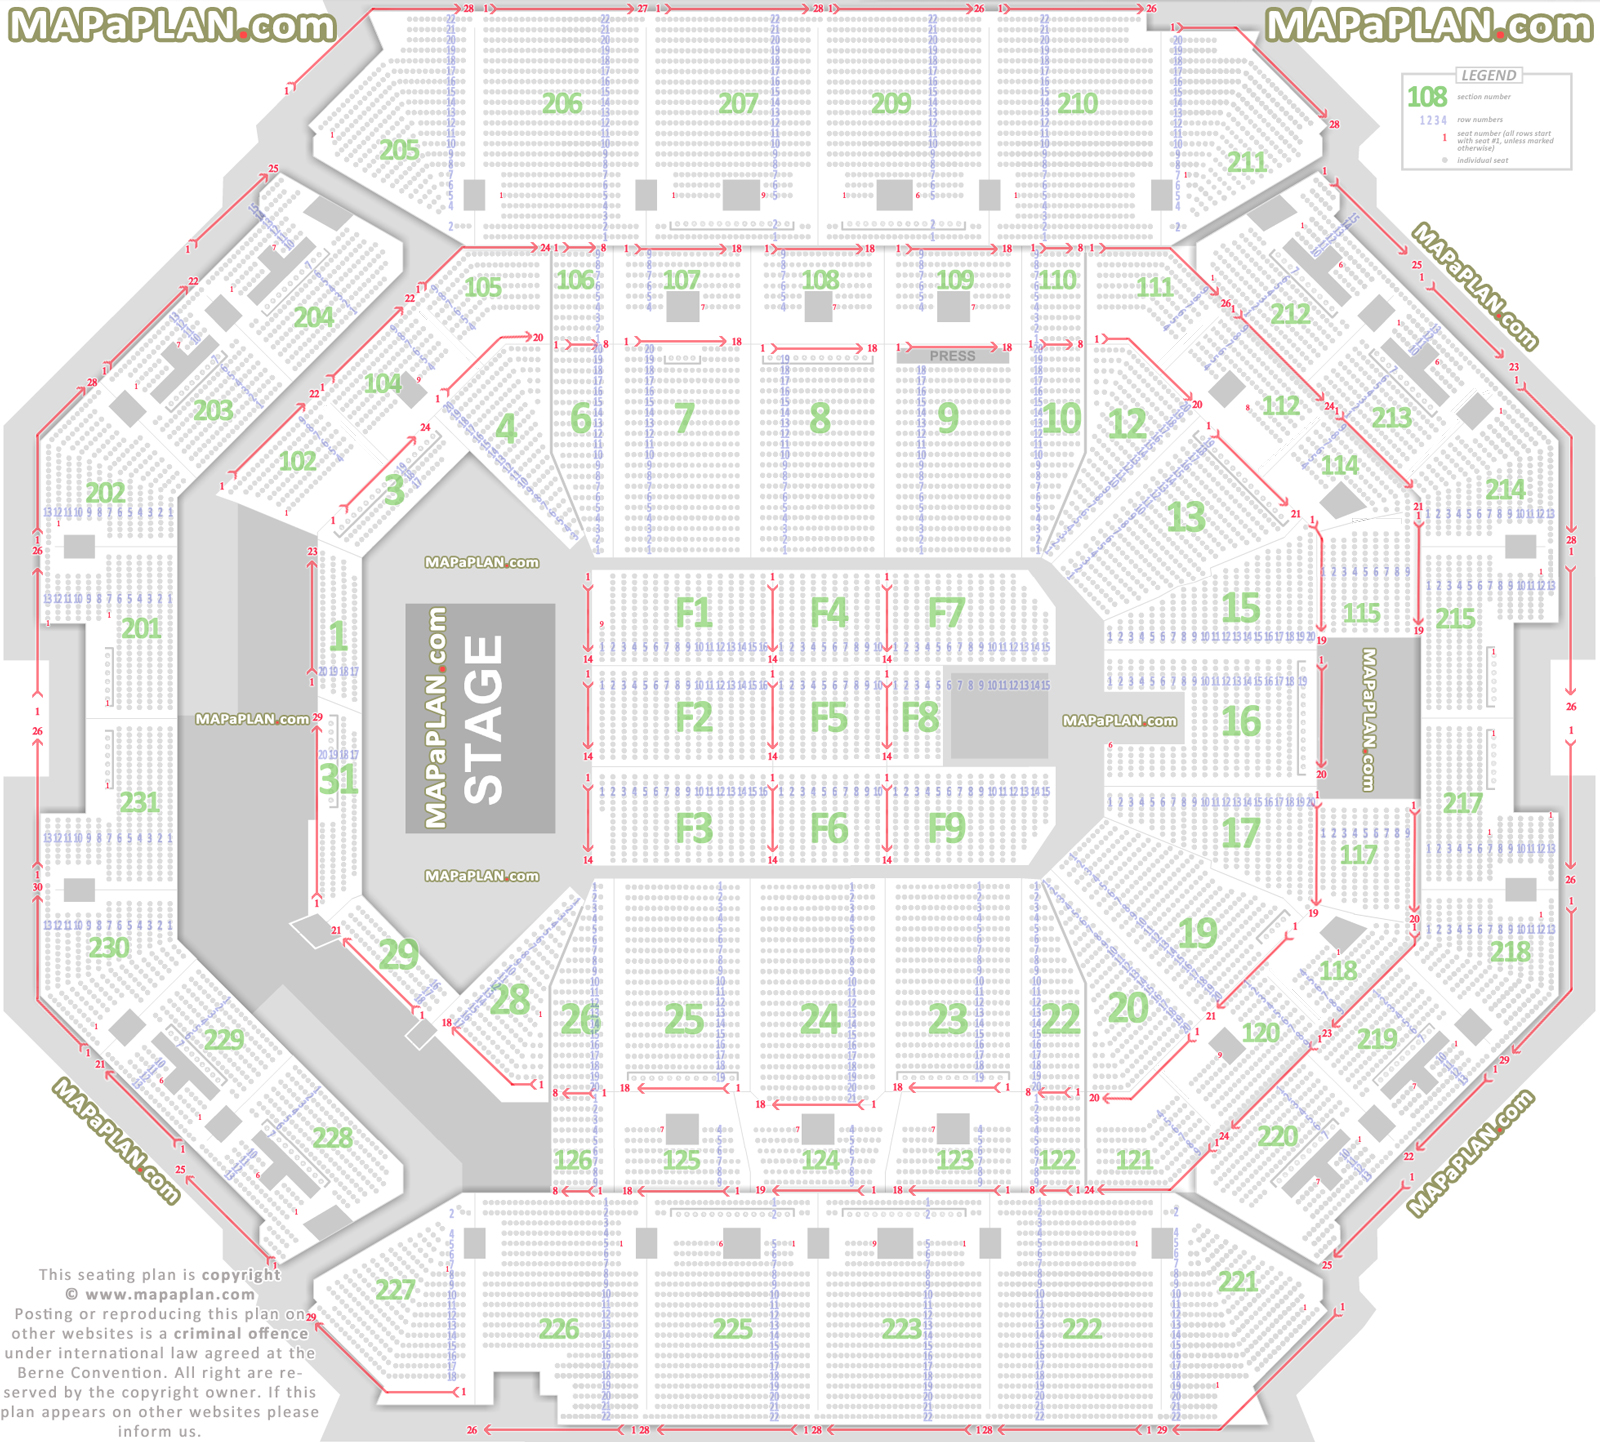 Detailed seat numbers concert chart with rows sections layout Barclays Center Brooklyn seating chart